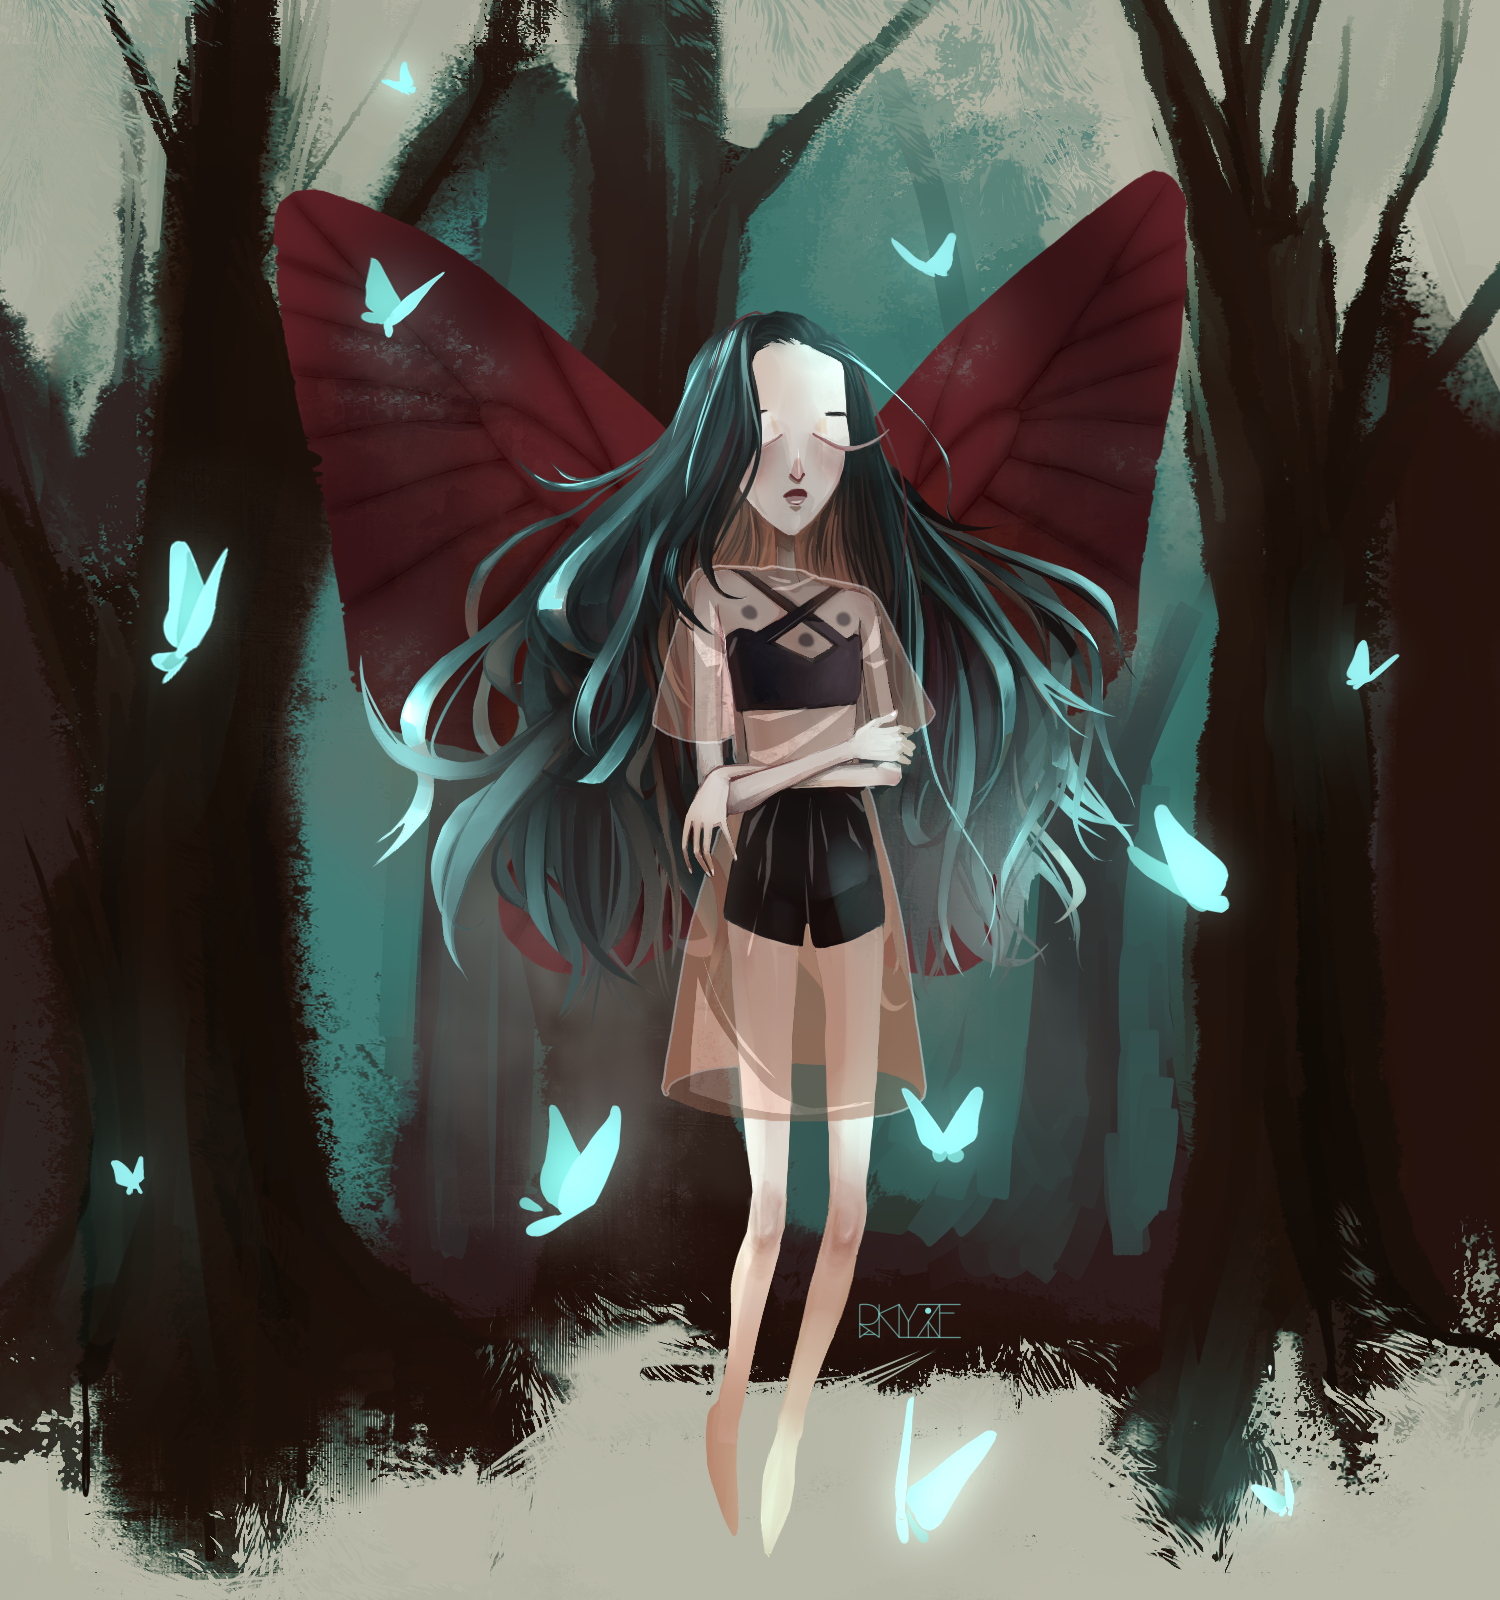 Trade with one girl - Butterfly, Trade, Drawing, Art, Fairy, Girl, My